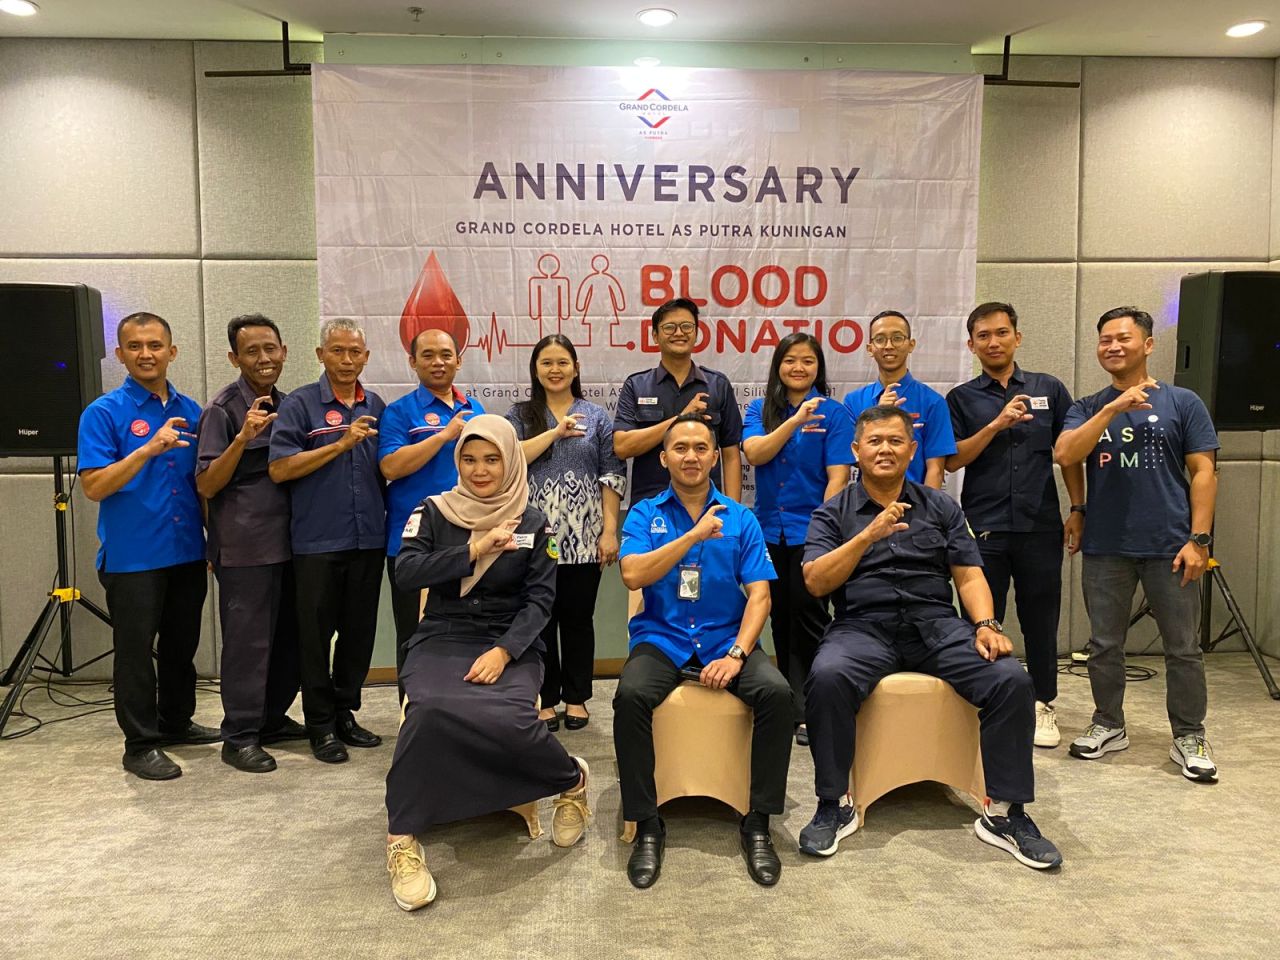 celebrate-the-12th-anniversary-grand-cordela-hotel-as-putra-kuningan-distributes-vouchers-helps-the-indonesian-red-cross-hosts-blood-donation-drive